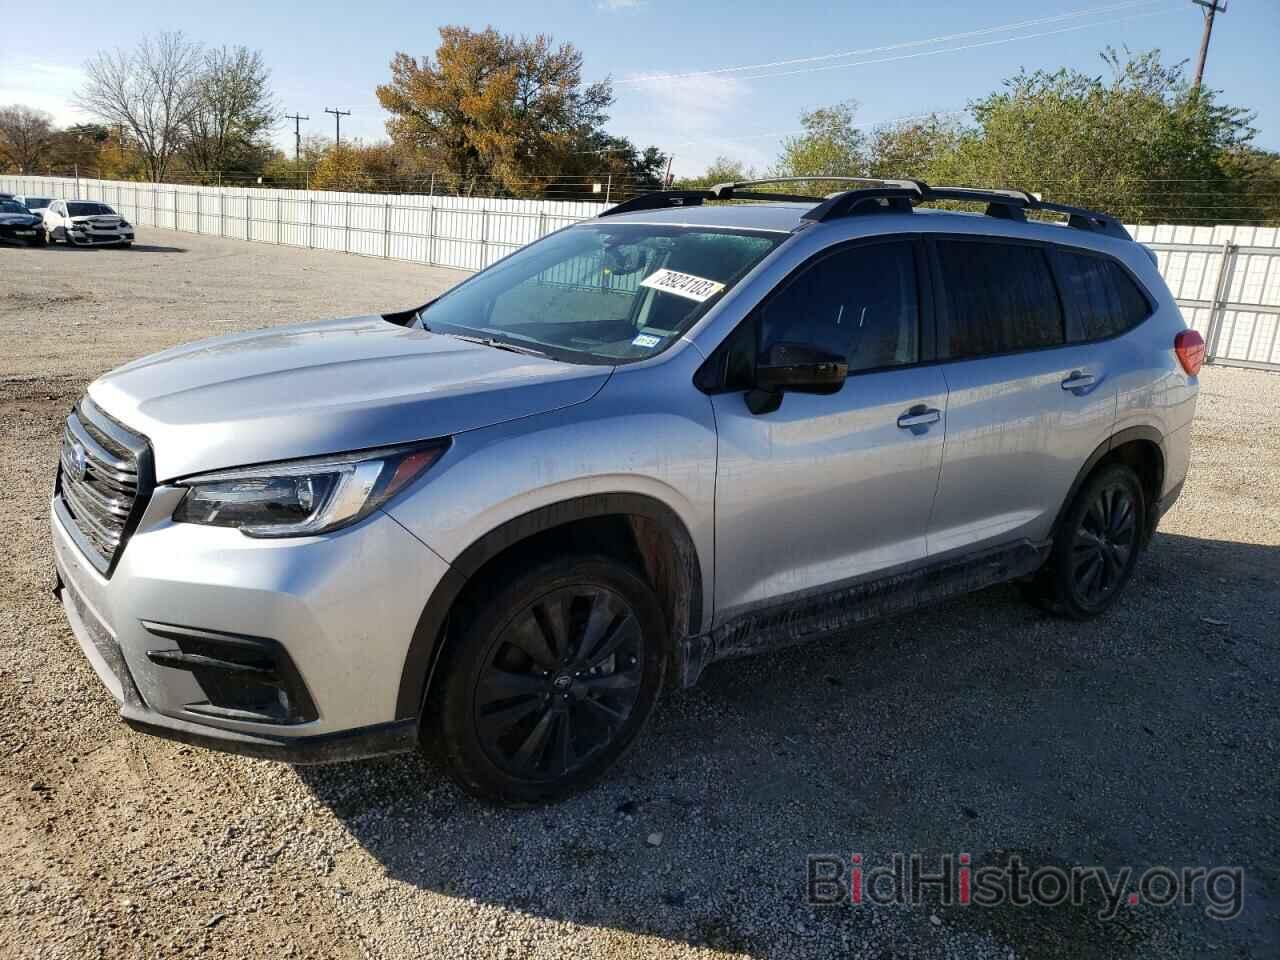 Photo 4S4WMAGD0N3412403 - SUBARU ASCENT ONY 2022